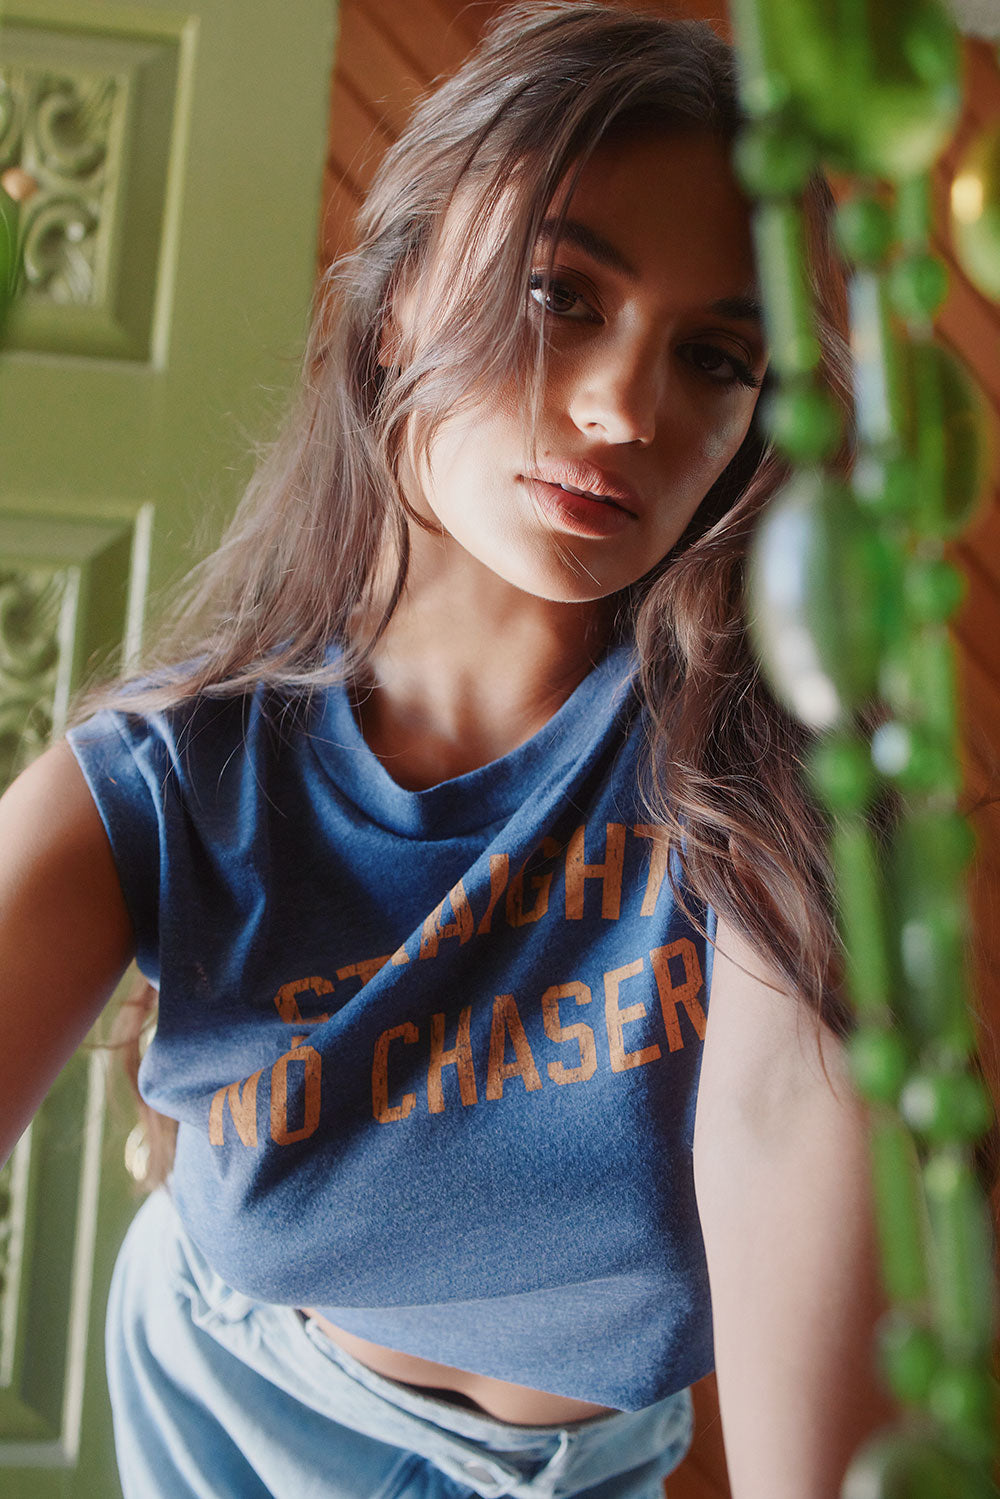 Chaser Brand (@chaserbrand) • Instagram photos and videos